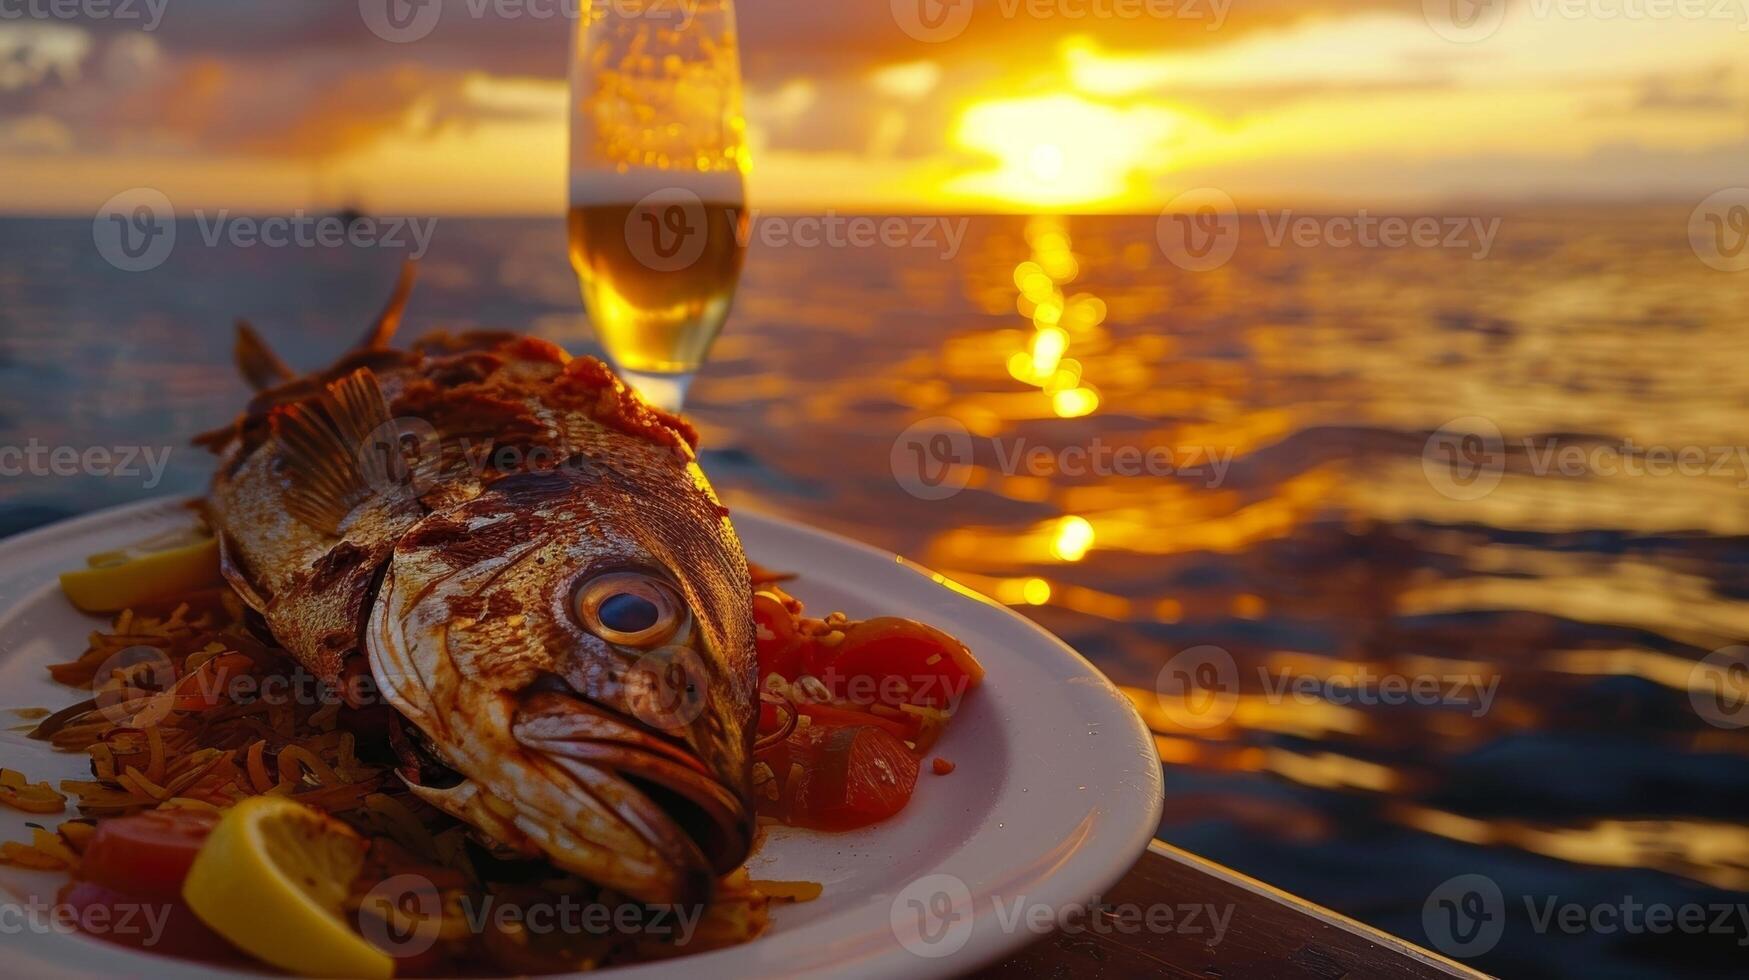 After a day of exploring a sunset dinner cruise includes fresh grilled fish caught that morning and prepared onboard by a renowned chef photo